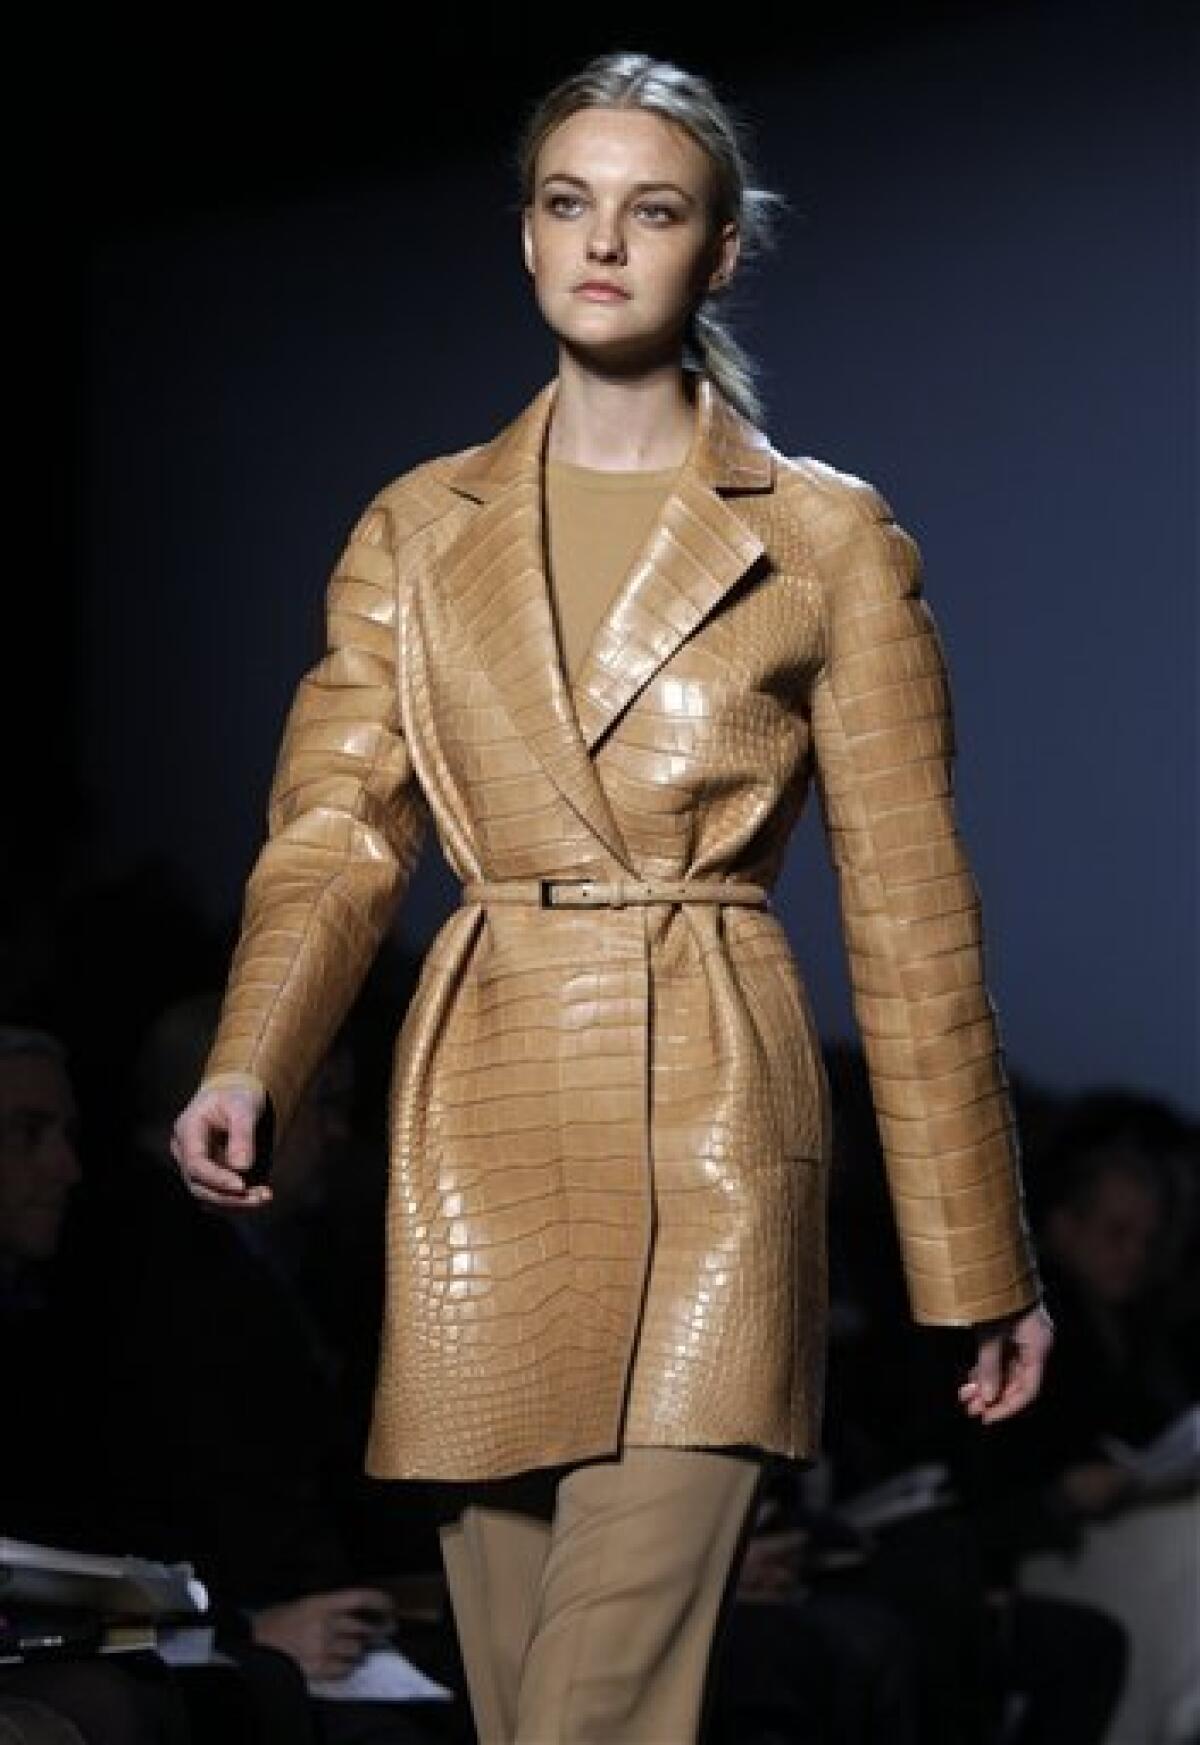 The fall 2011 collection of designer Michael Kors is modeled during Fashion Week in New York, Wednesday, Feb. 16, 2011. (AP Photo/Richard Drew)